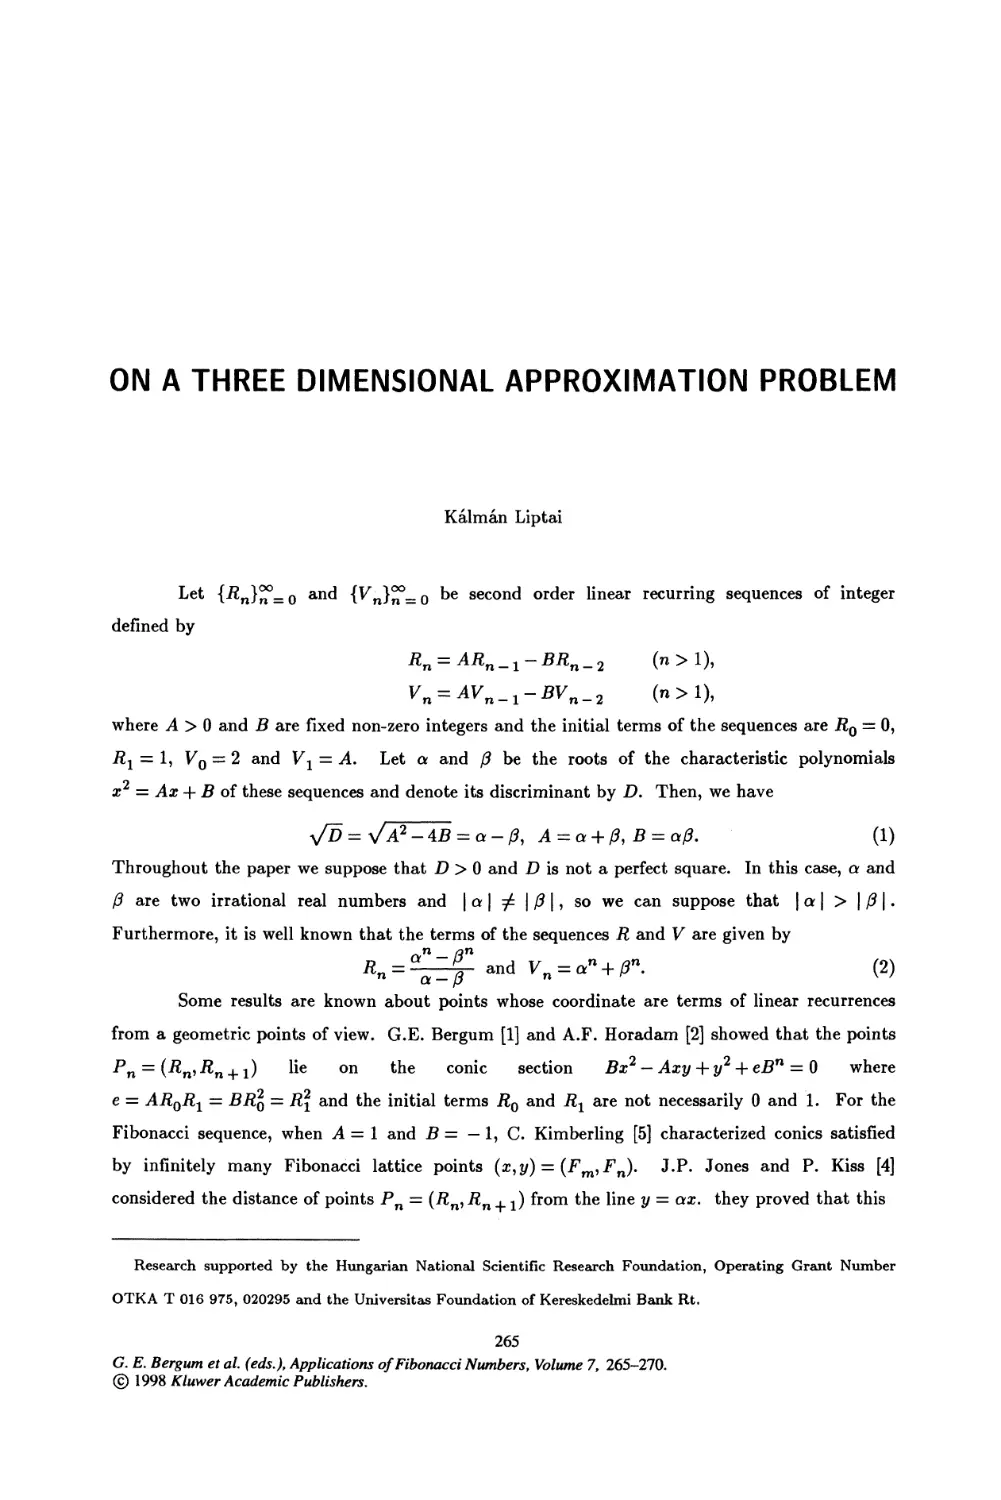 29. On a Three Dimensional Approximation Problem